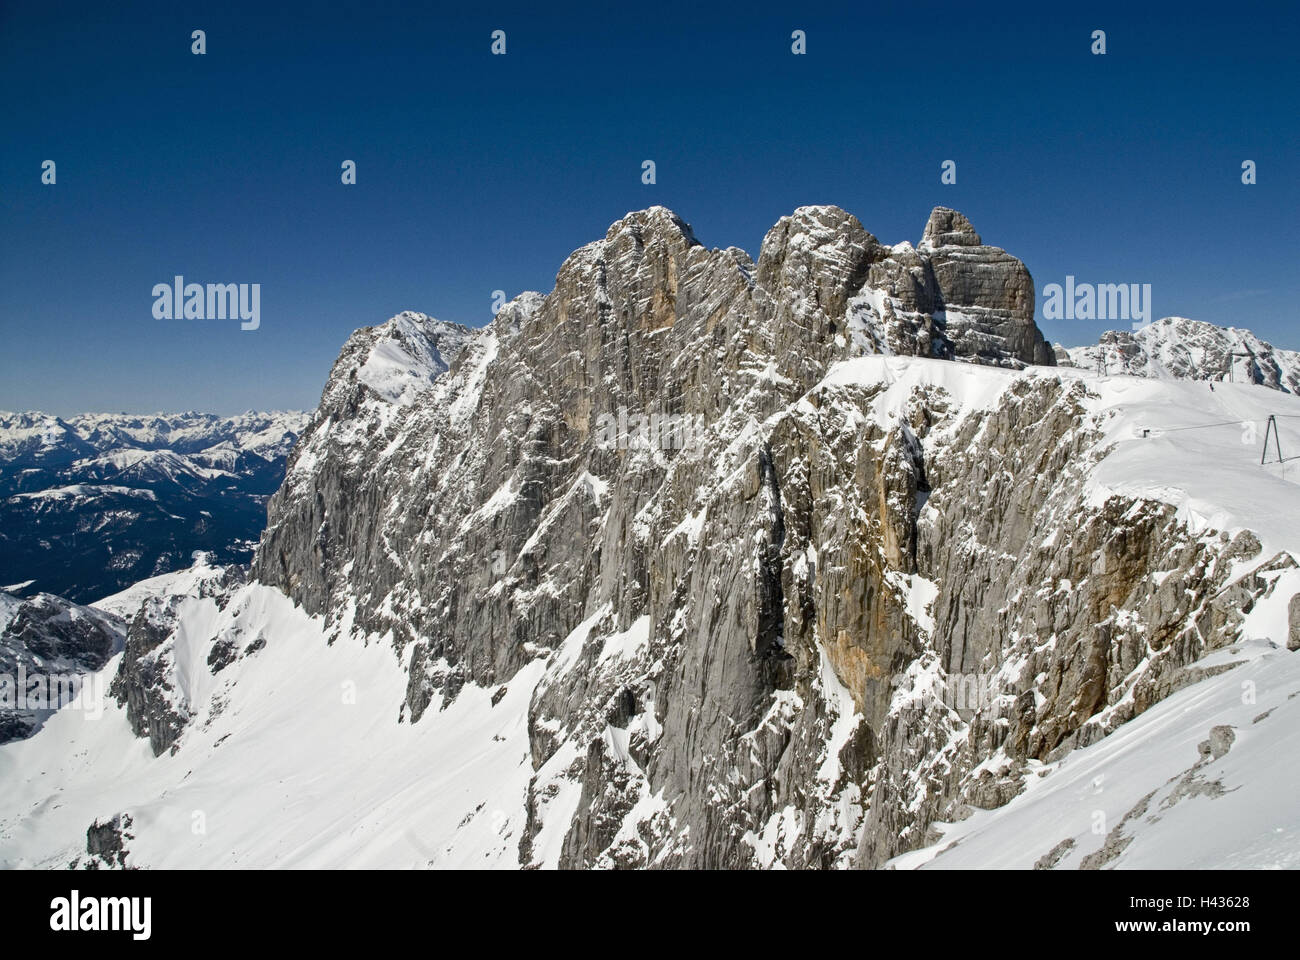 Austria, Styria, Ramsau in the roof stone, mountain, scenery, winter, winter scenery, UNESCO-world nature heir, UNESCO-world cultural heritage, nature, mountains, summit, Stock Photo